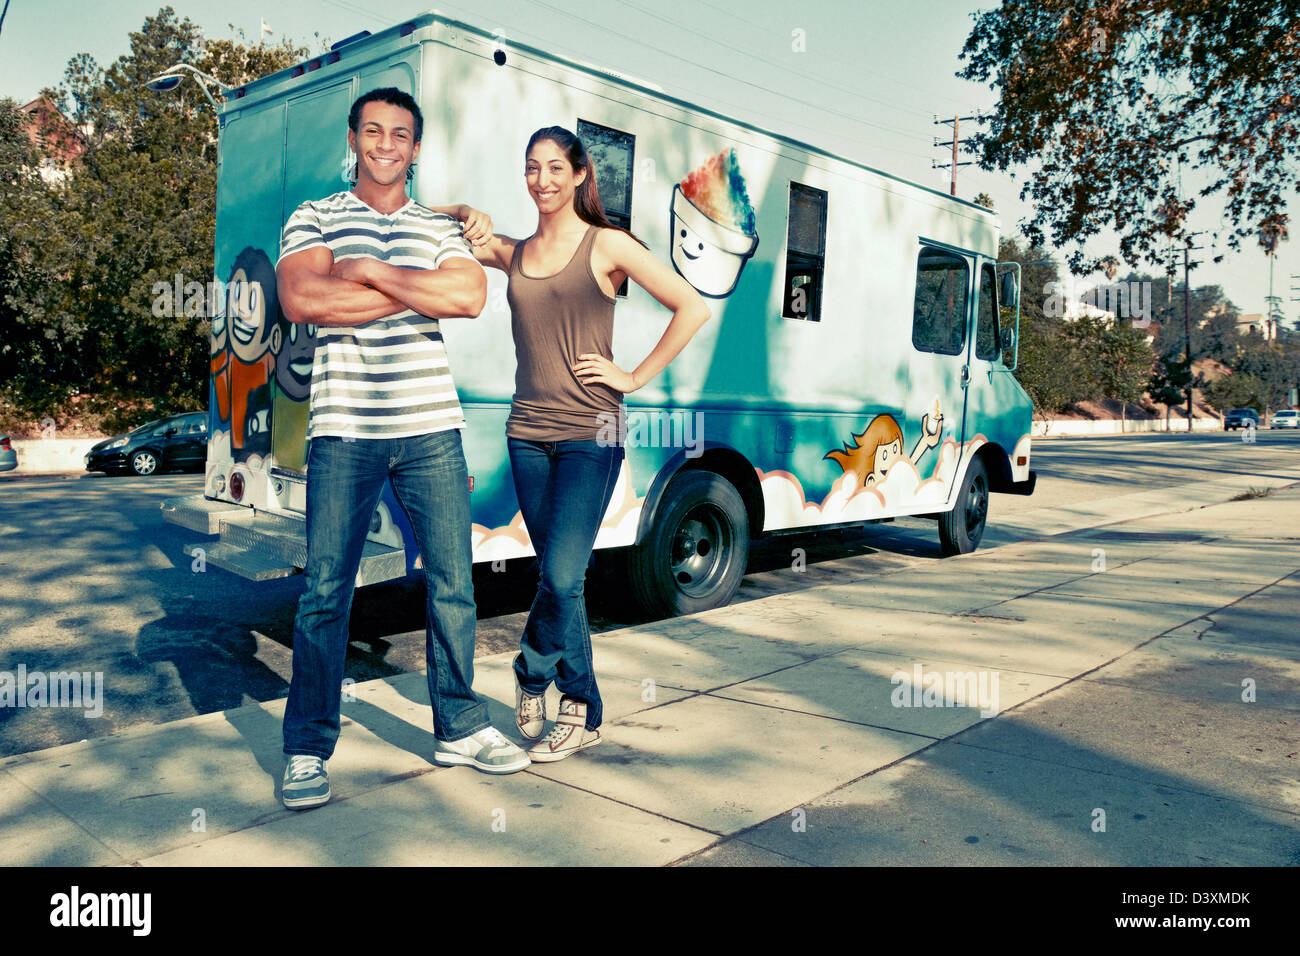 Couple standing by ice cream truck Stock Photo